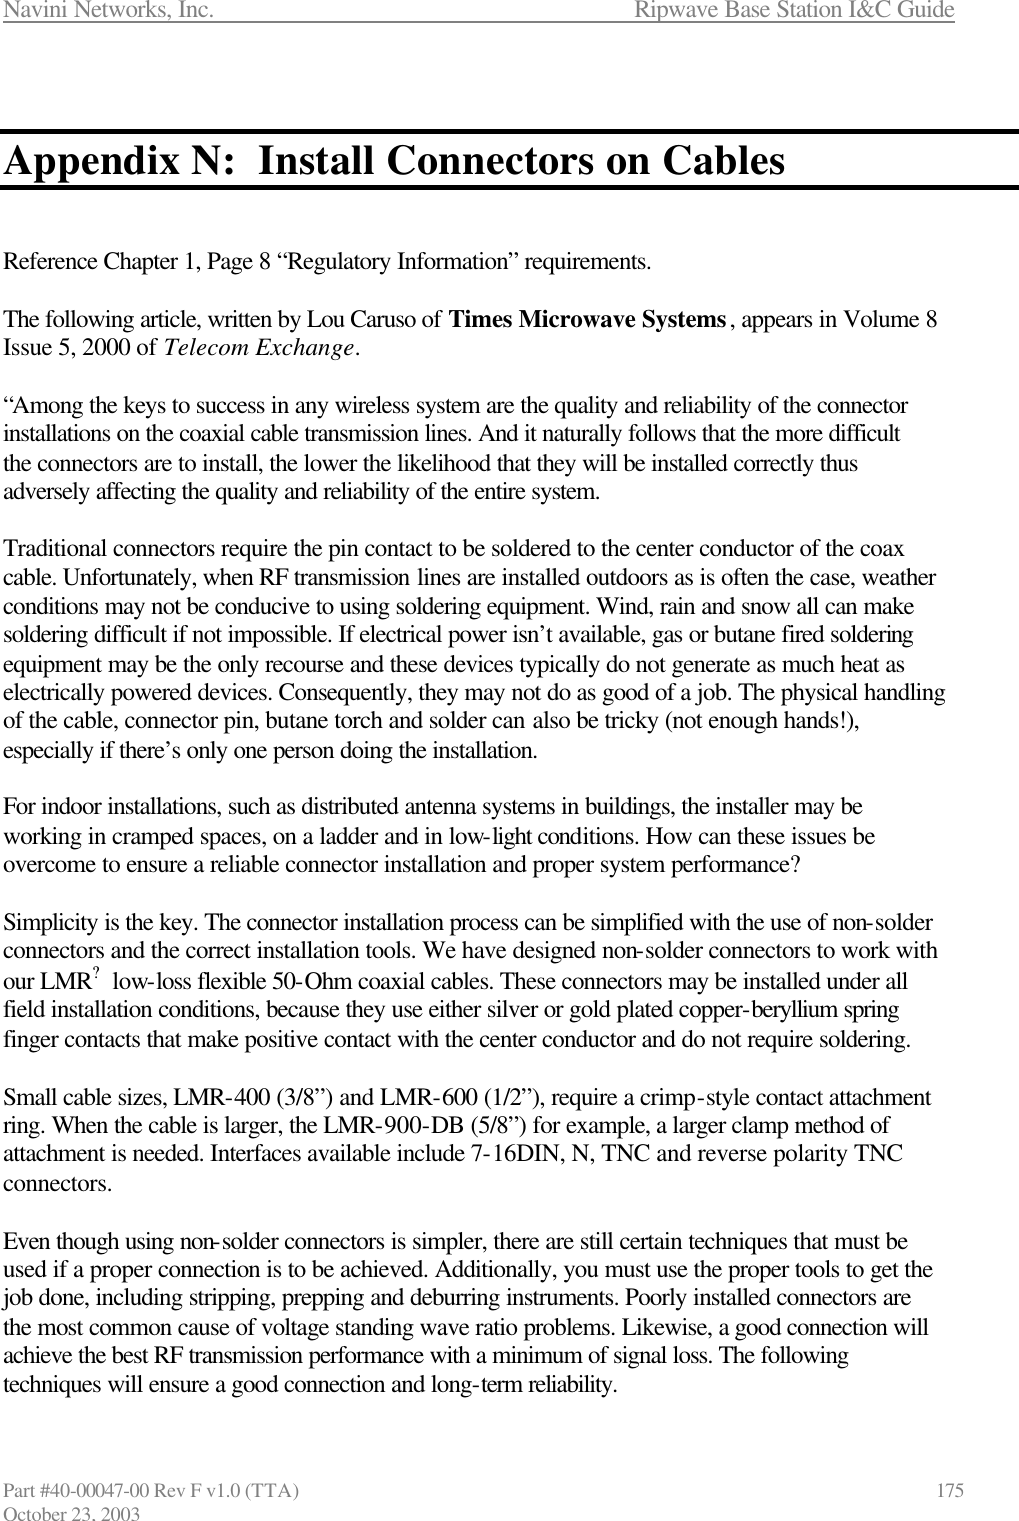 Navini Networks, Inc.                      Ripwave Base Station I&amp;C Guide Part #40-00047-00 Rev F v1.0 (TTA)                            175 October 23, 2003   Appendix N:  Install Connectors on Cables   Reference Chapter 1, Page 8 “Regulatory Information” requirements.  The following article, written by Lou Caruso of Times Microwave Systems, appears in Volume 8 Issue 5, 2000 of Telecom Exchange.  “Among the keys to success in any wireless system are the quality and reliability of the connector installations on the coaxial cable transmission lines. And it naturally follows that the more difficult the connectors are to install, the lower the likelihood that they will be installed correctly thus adversely affecting the quality and reliability of the entire system.  Traditional connectors require the pin contact to be soldered to the center conductor of the coax cable. Unfortunately, when RF transmission lines are installed outdoors as is often the case, weather conditions may not be conducive to using soldering equipment. Wind, rain and snow all can make soldering difficult if not impossible. If electrical power isn’t available, gas or butane fired soldering equipment may be the only recourse and these devices typically do not generate as much heat as electrically powered devices. Consequently, they may not do as good of a job. The physical handling of the cable, connector pin, butane torch and solder can also be tricky (not enough hands!), especially if there’s only one person doing the installation.  For indoor installations, such as distributed antenna systems in buildings, the installer may be working in cramped spaces, on a ladder and in low-light conditions. How can these issues be overcome to ensure a reliable connector installation and proper system performance?  Simplicity is the key. The connector installation process can be simplified with the use of non-solder connectors and the correct installation tools. We have designed non-solder connectors to work with our LMR? low-loss flexible 50-Ohm coaxial cables. These connectors may be installed under all field installation conditions, because they use either silver or gold plated copper-beryllium spring finger contacts that make positive contact with the center conductor and do not require soldering.  Small cable sizes, LMR-400 (3/8”) and LMR-600 (1/2”), require a crimp-style contact attachment ring. When the cable is larger, the LMR-900-DB (5/8”) for example, a larger clamp method of attachment is needed. Interfaces available include 7-16DIN, N, TNC and reverse polarity TNC connectors.  Even though using non-solder connectors is simpler, there are still certain techniques that must be used if a proper connection is to be achieved. Additionally, you must use the proper tools to get the job done, including stripping, prepping and deburring instruments. Poorly installed connectors are the most common cause of voltage standing wave ratio problems. Likewise, a good connection will achieve the best RF transmission performance with a minimum of signal loss. The following techniques will ensure a good connection and long-term reliability. 